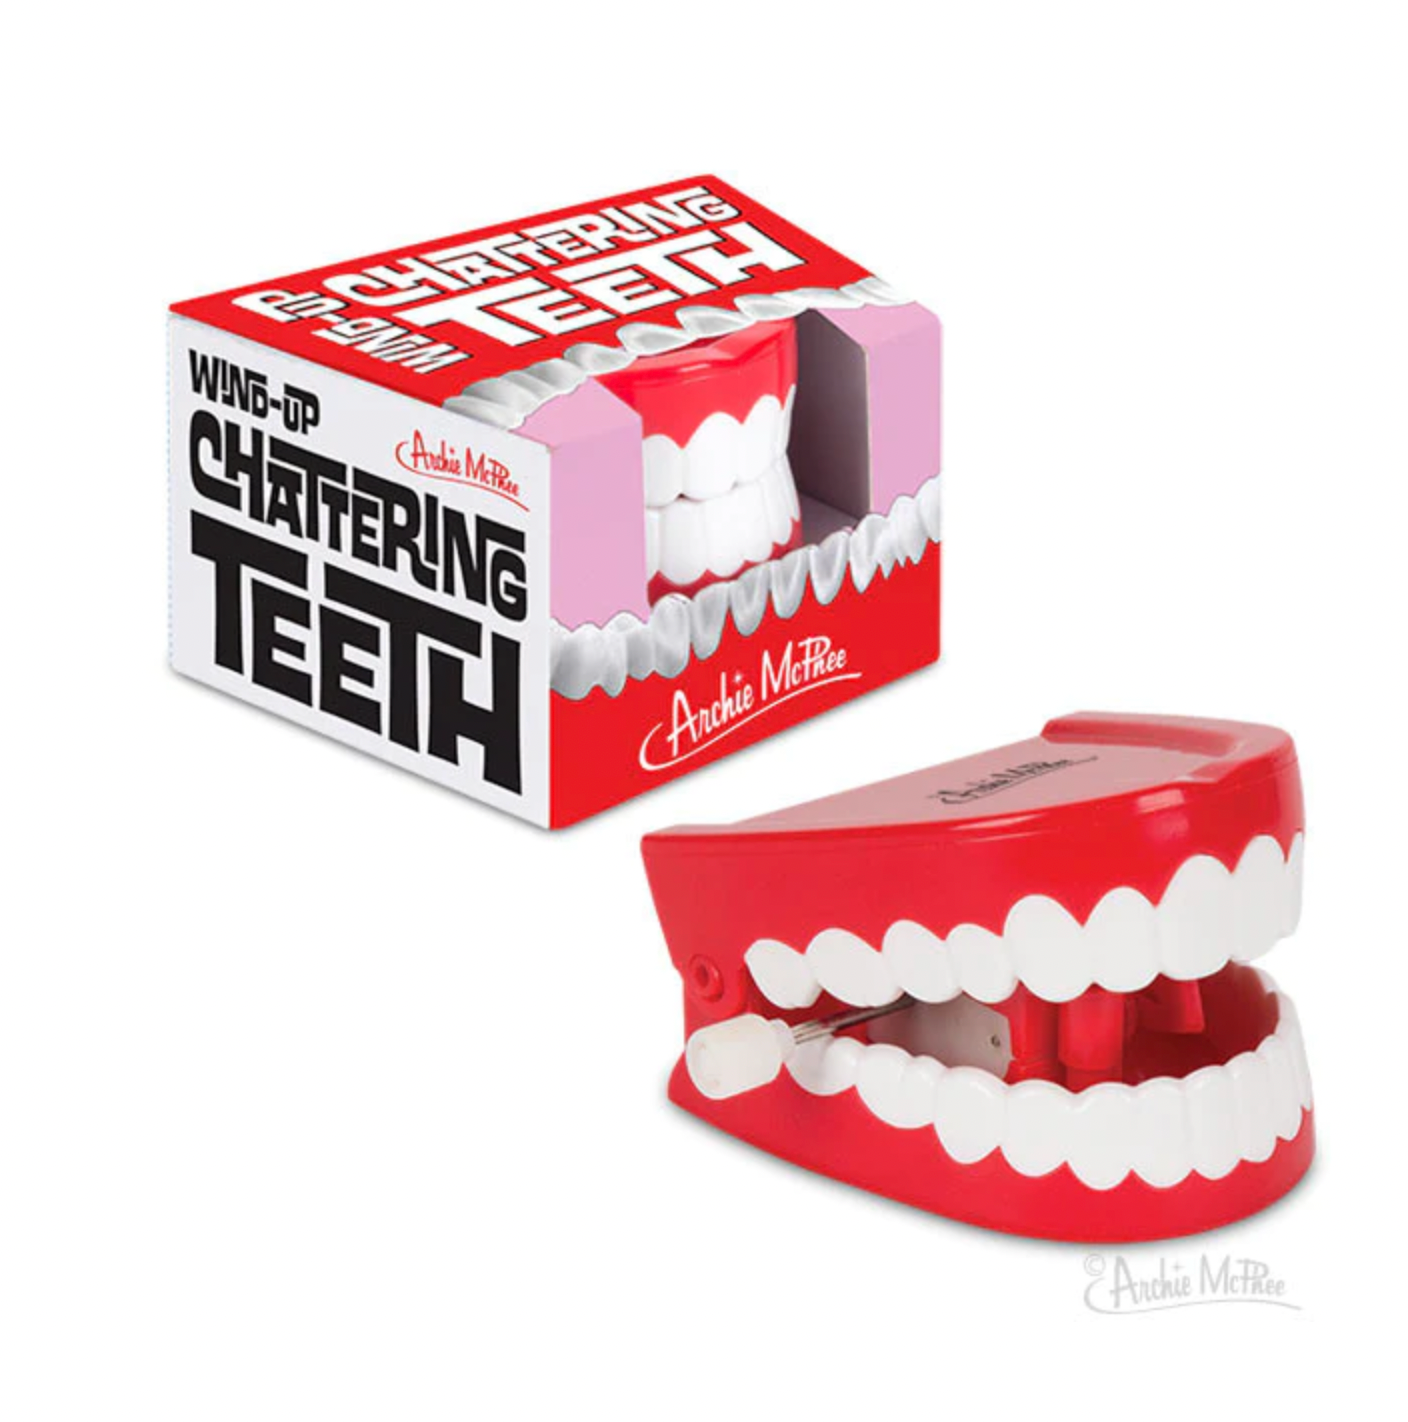 Wind Up Chattering Teeth